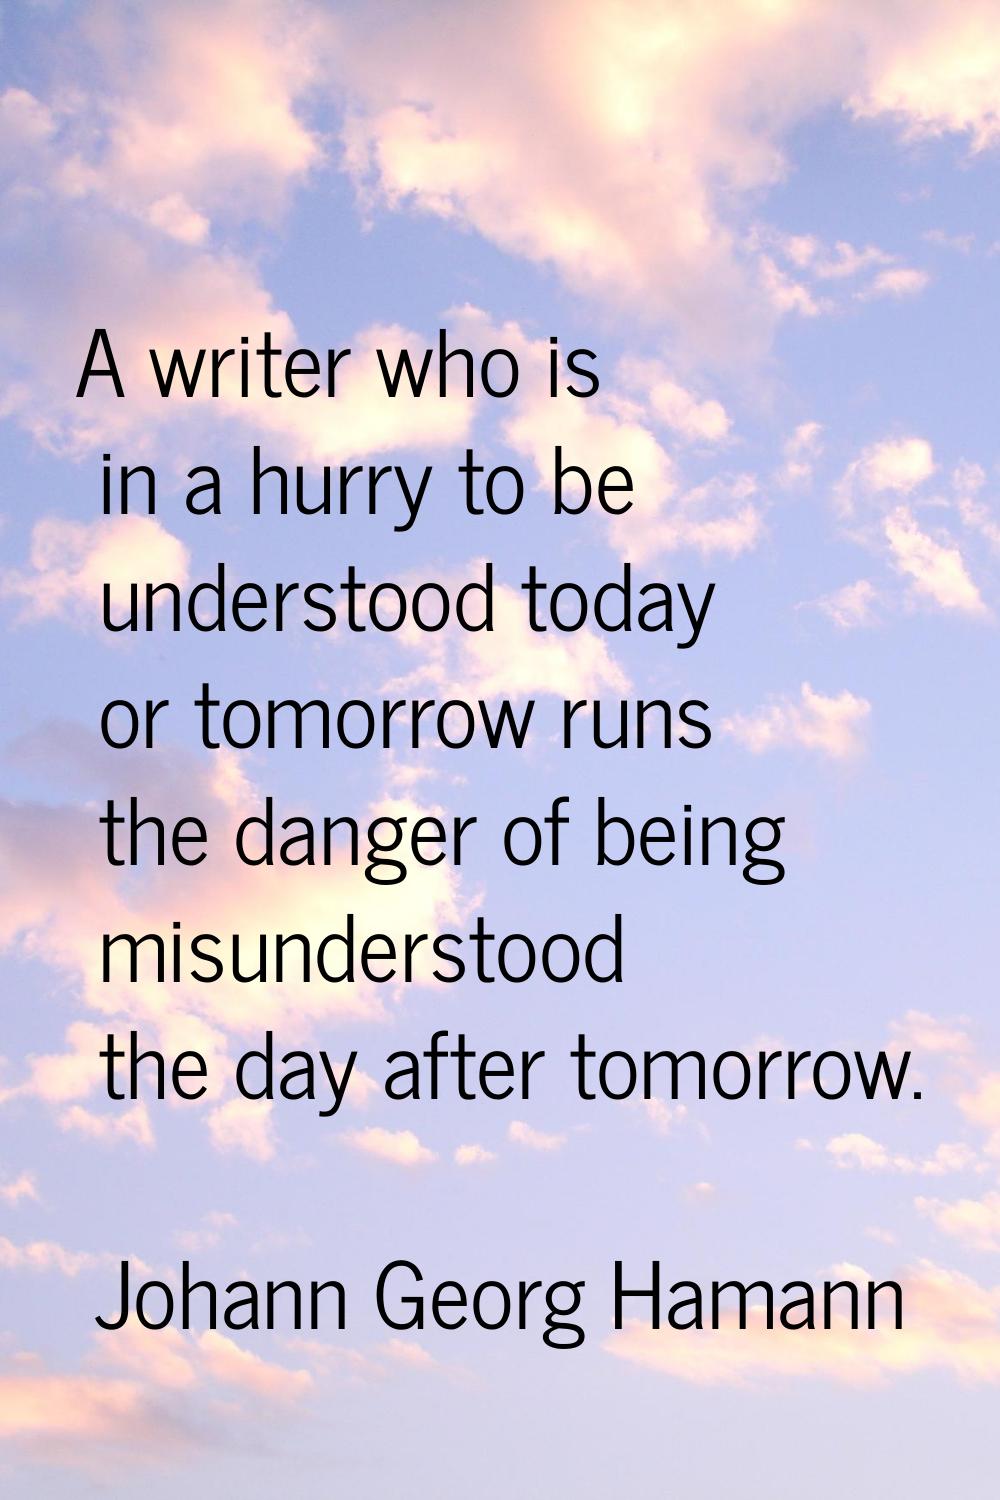 A writer who is in a hurry to be understood today or tomorrow runs the danger of being misunderstoo